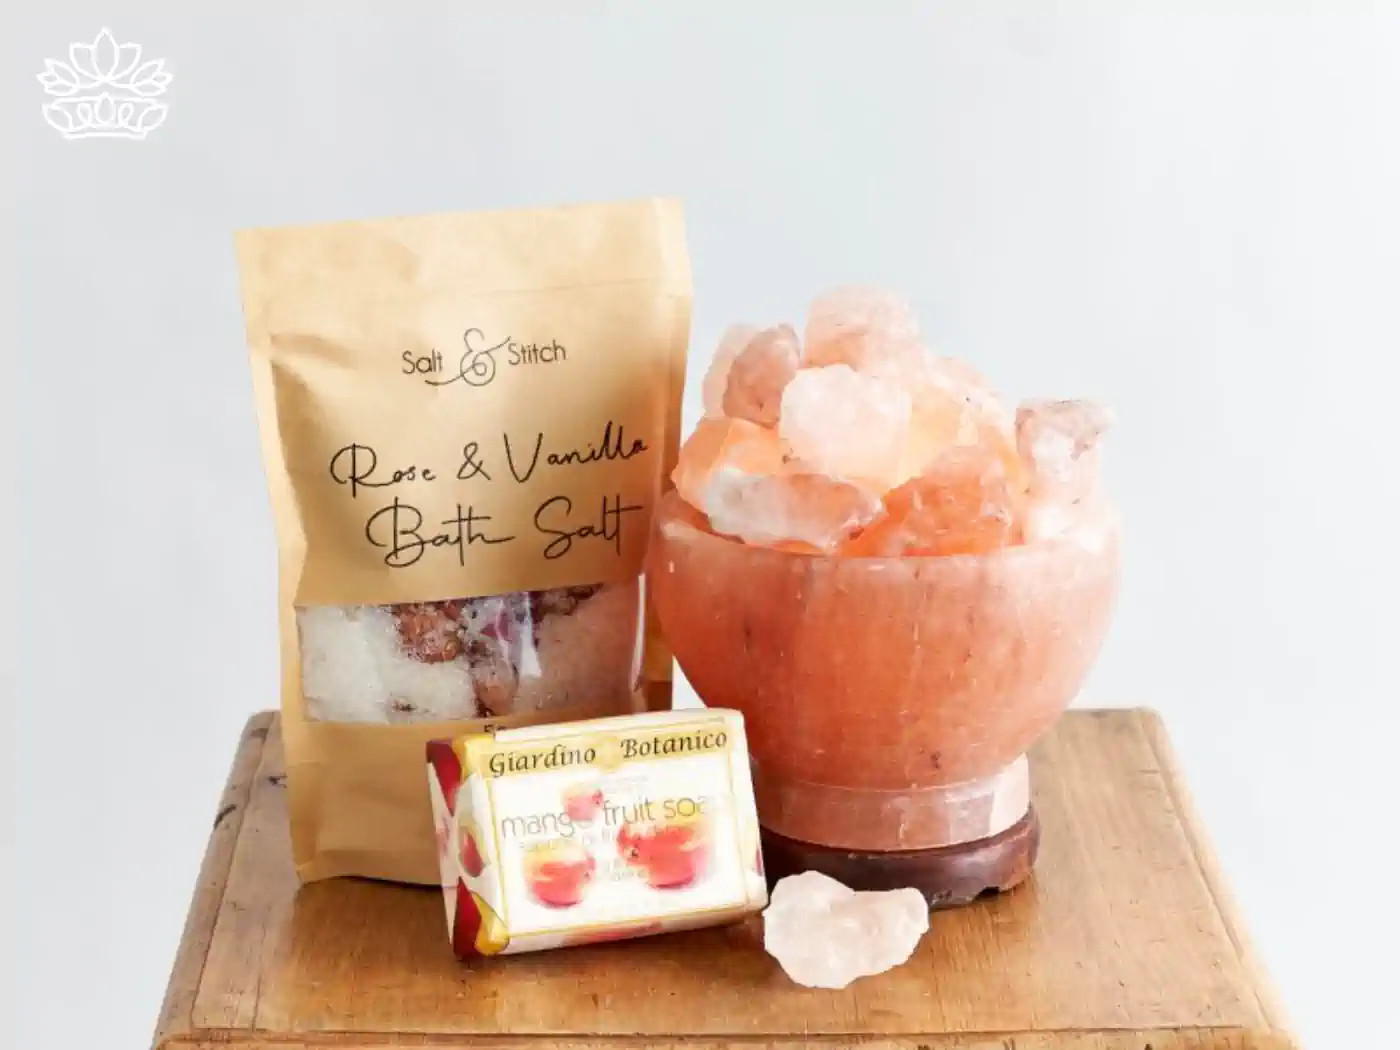 A luxurious bath set including rose and vanilla bath salts, mango fruit soap, and a Himalayan salt lamp, offering a relaxing self-care gift box for mum. Delivered with heart. Fabulous Flowers and Gifts.